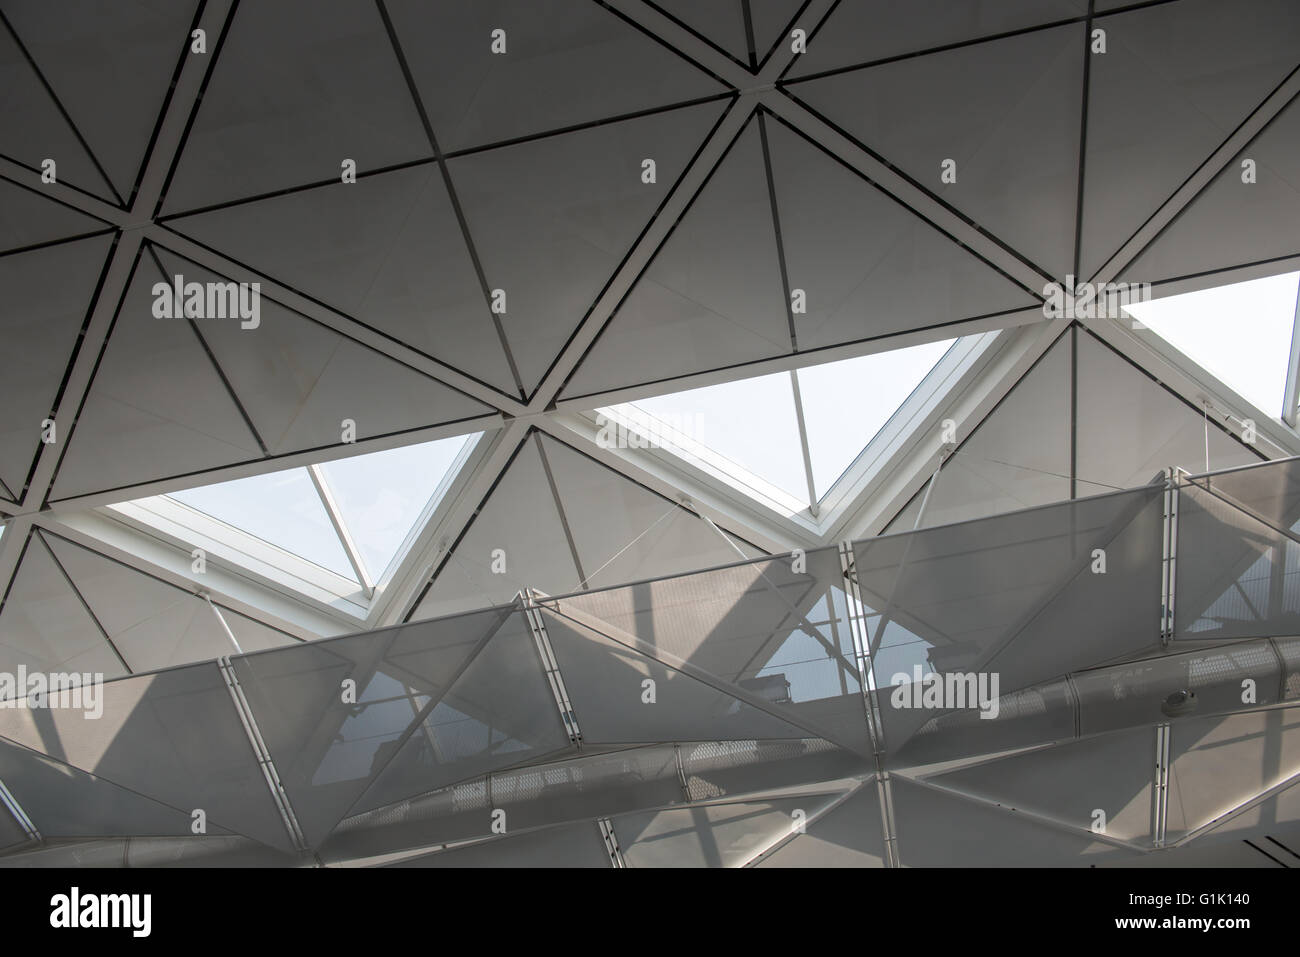 Structure of commercial ceiling and roof design Stock Photo